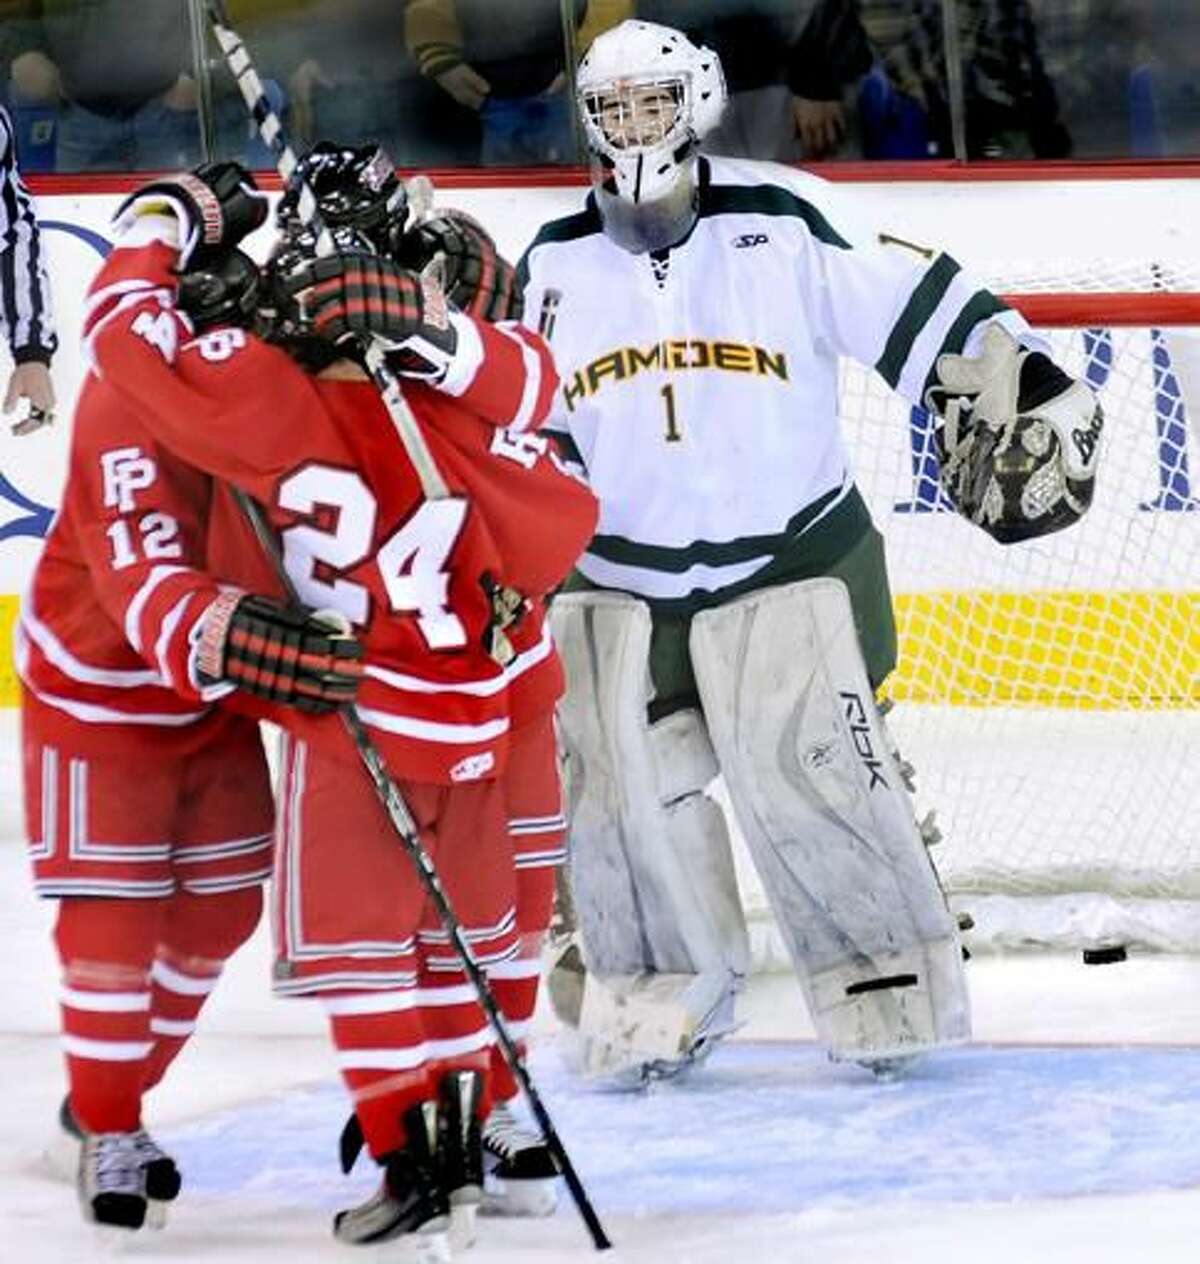 Fairfield Prep players celebrates their third goal of the night as Hamden goalie Ryan Amarone can only look on. Top-ranked Prep beat No. 2 Hamden in Tuesday’s game at the TD Bank Sports Center. (Photo by Melanie Stengel/ New Haven Register)